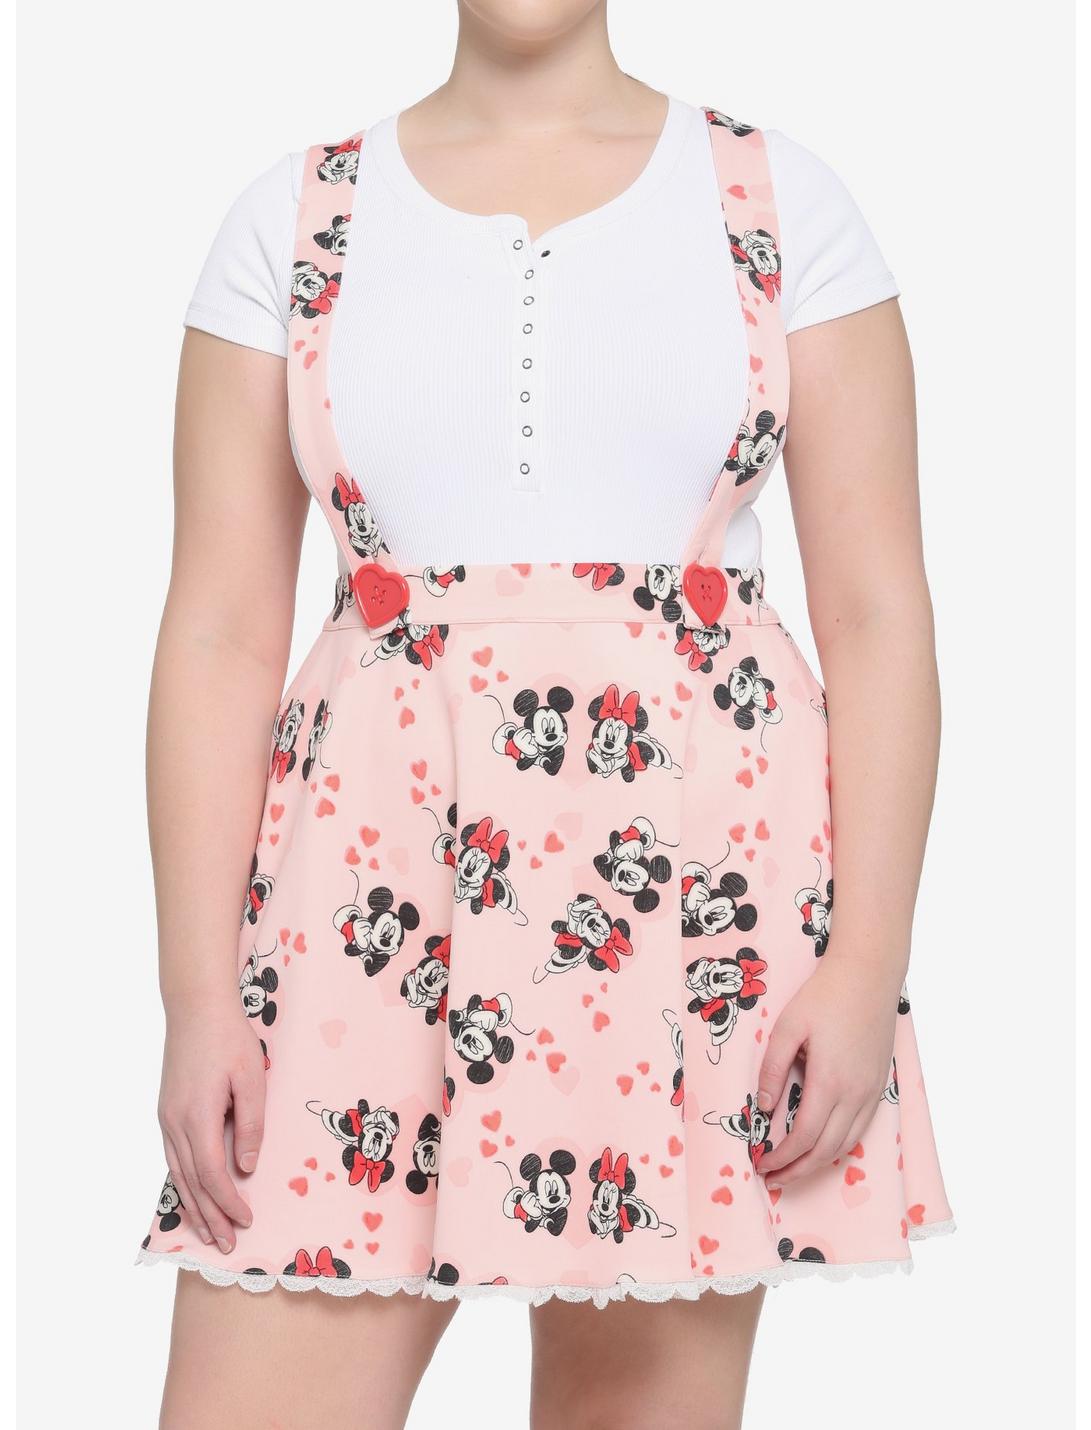 Her Universe Disney Mickey Mouse & Minnie Mouse Hearts Suspender Skirt Plus Size, MULTI, hi-res